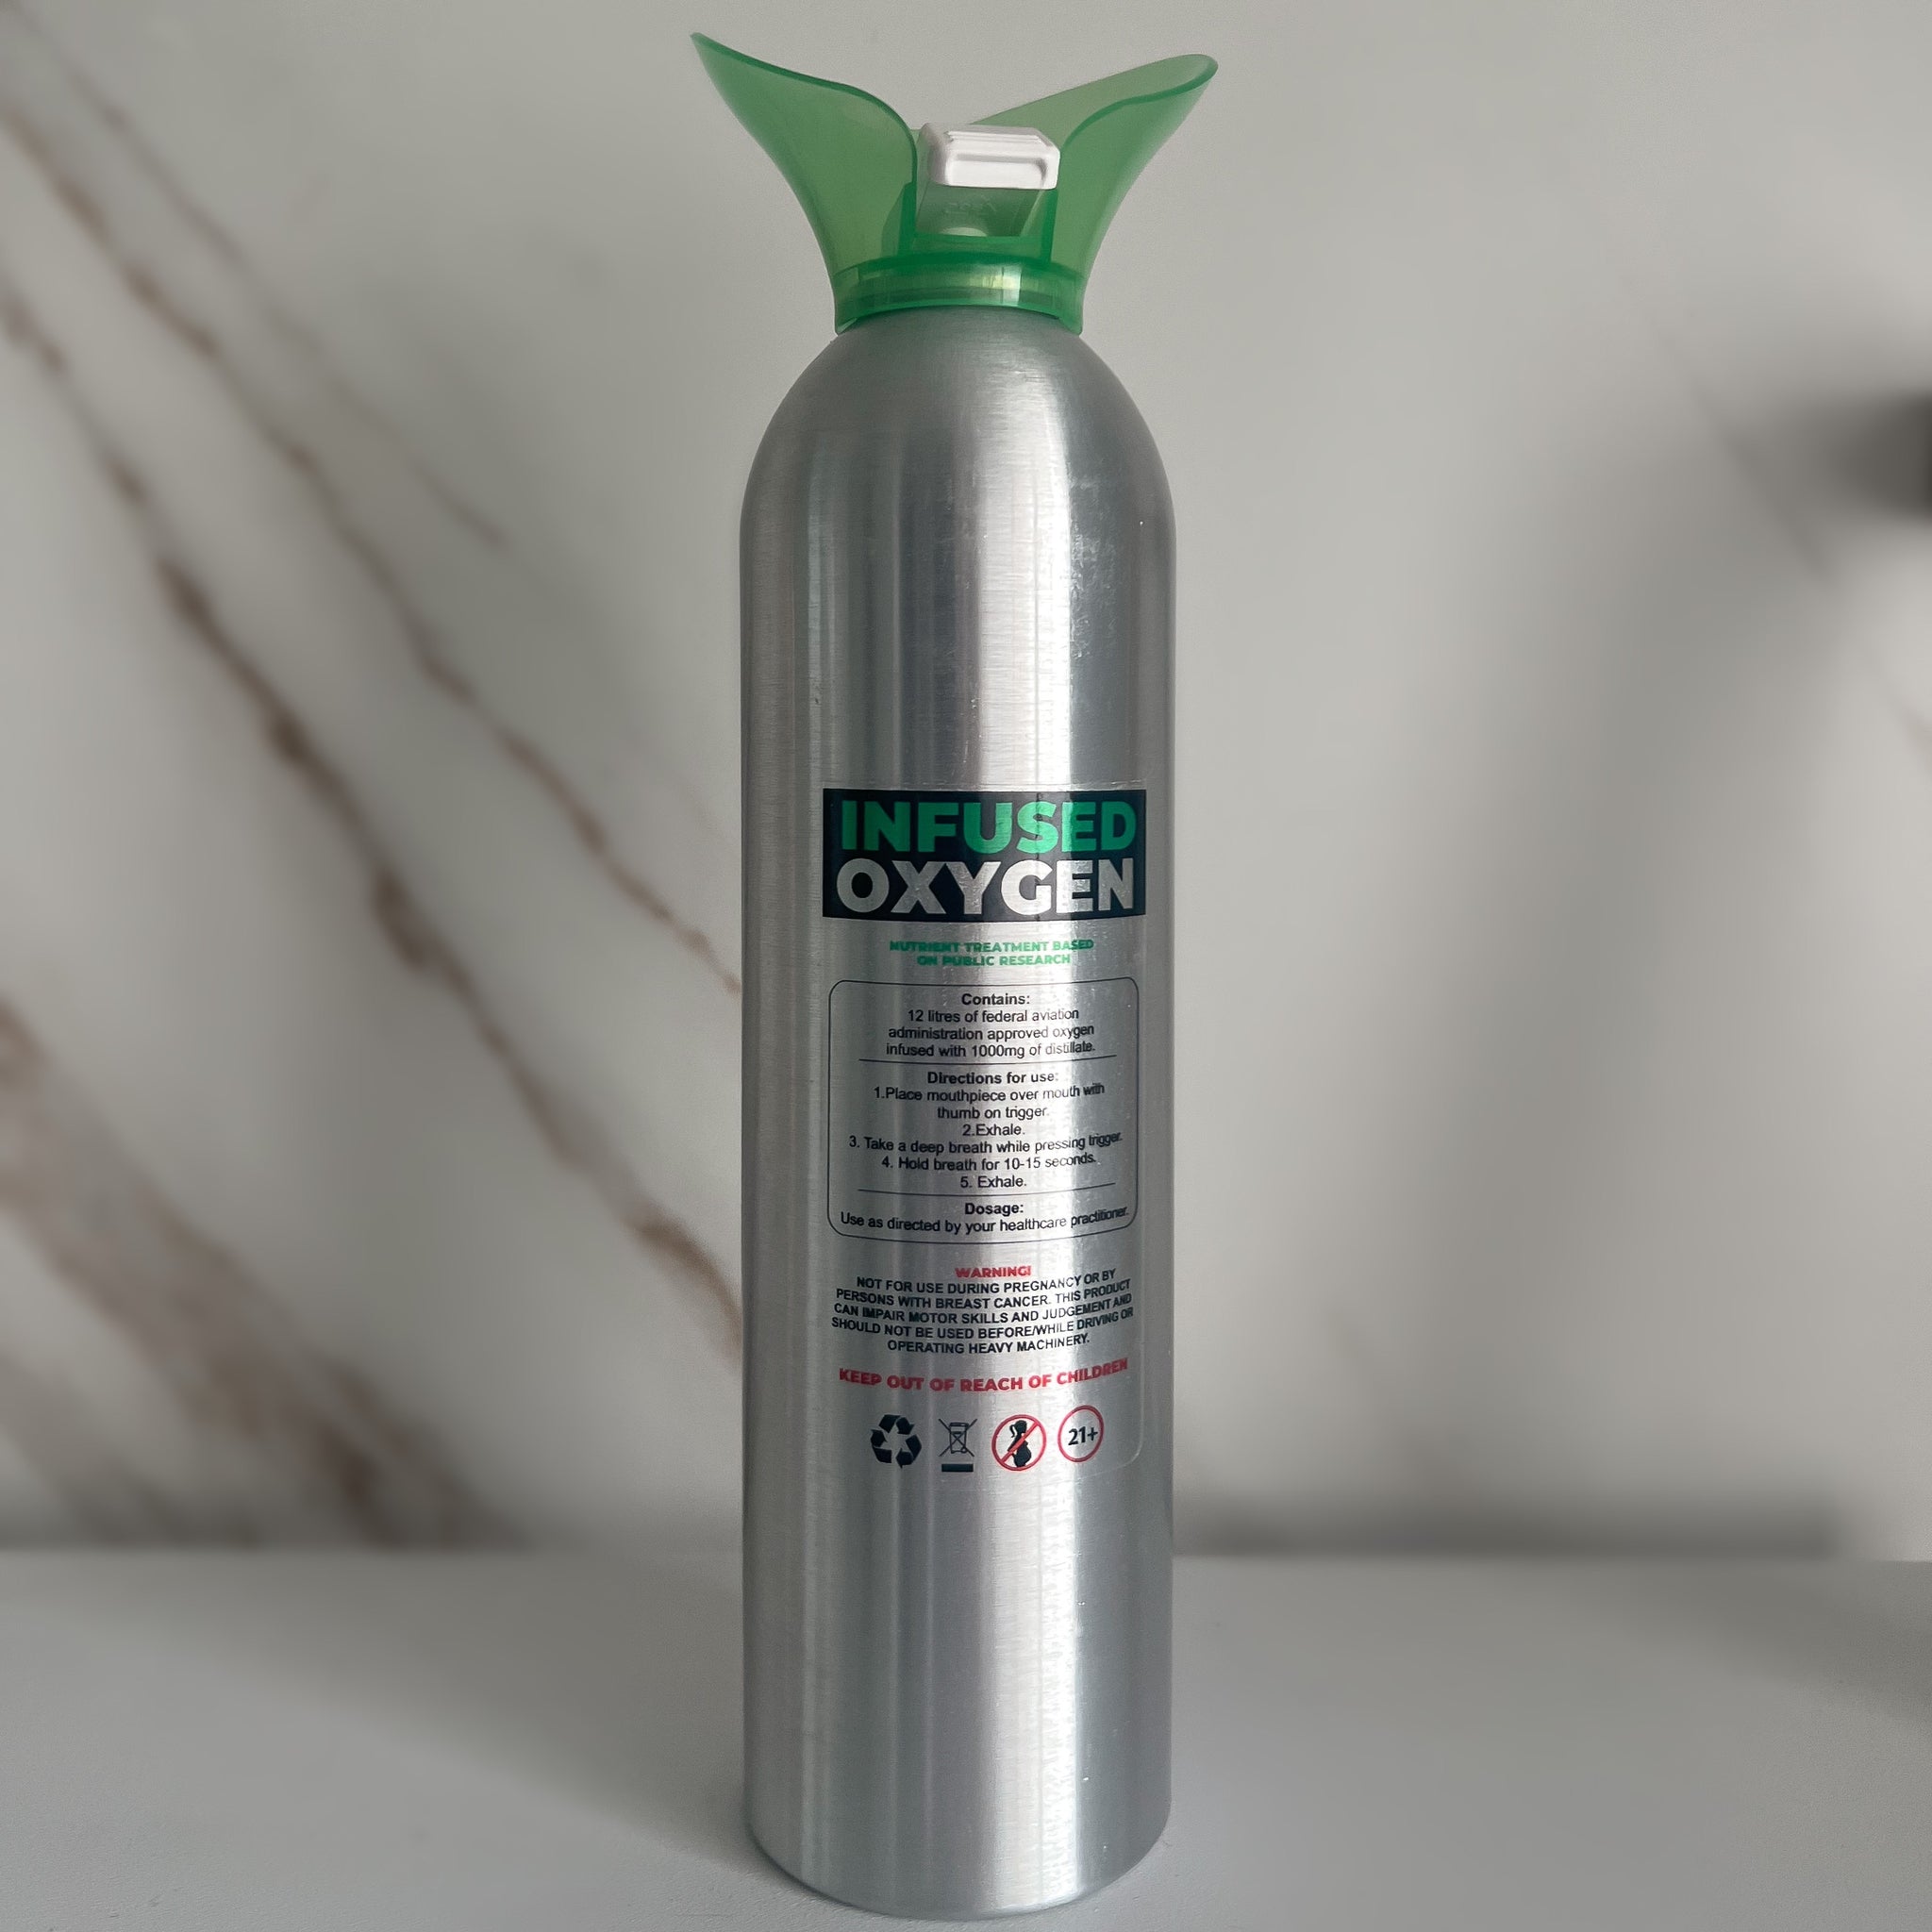 Infused Oxygen Canister